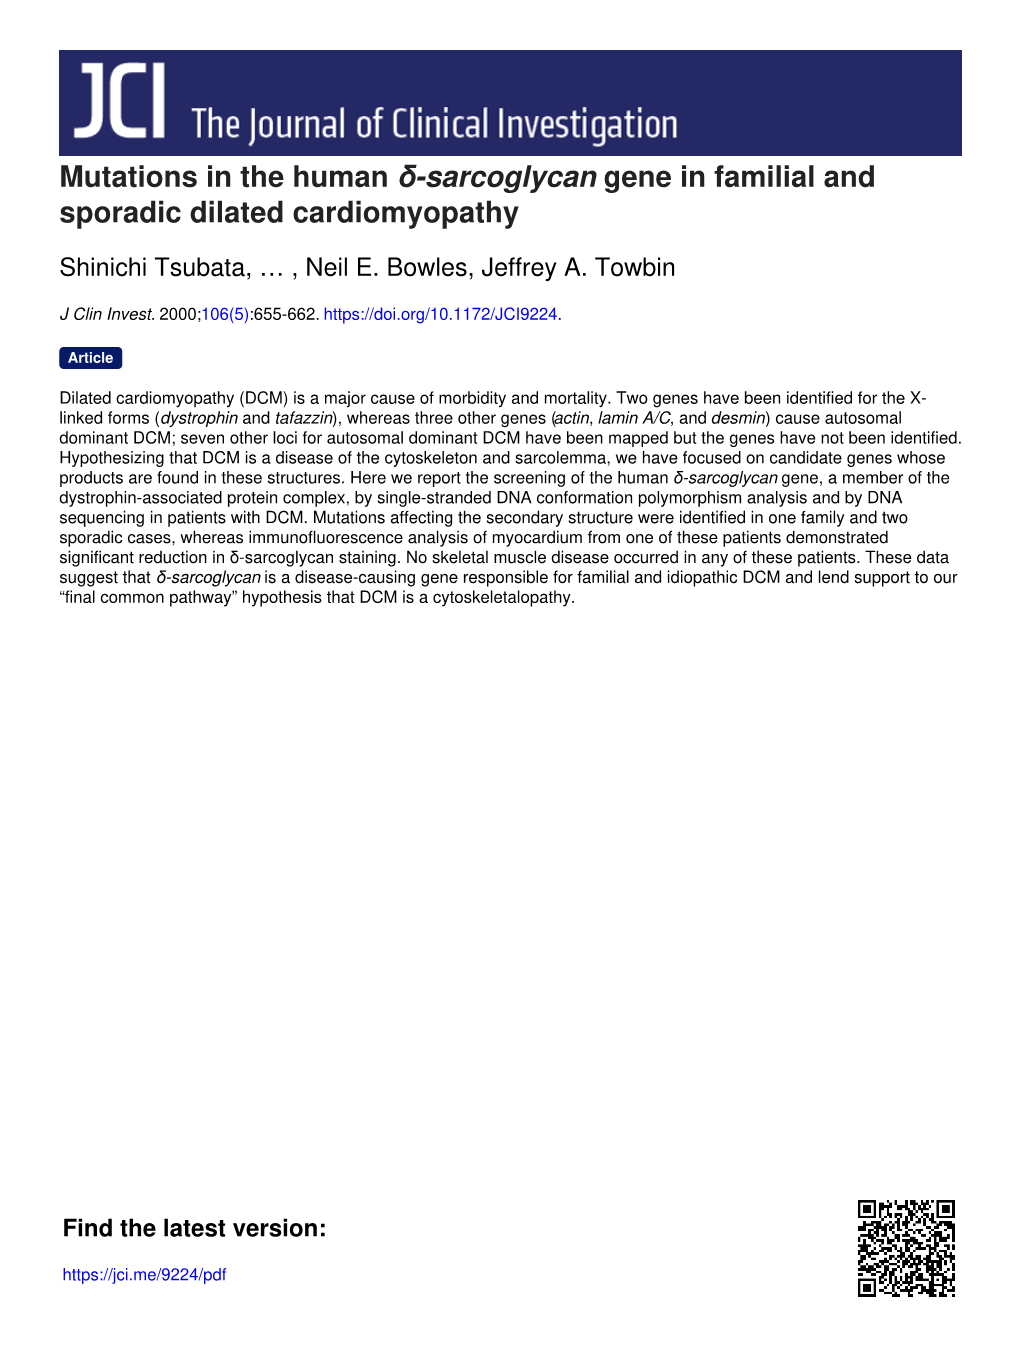 Mutations in the Human Δ-Sarcoglycan Gene in Familial and Sporadic Dilated Cardiomyopathy